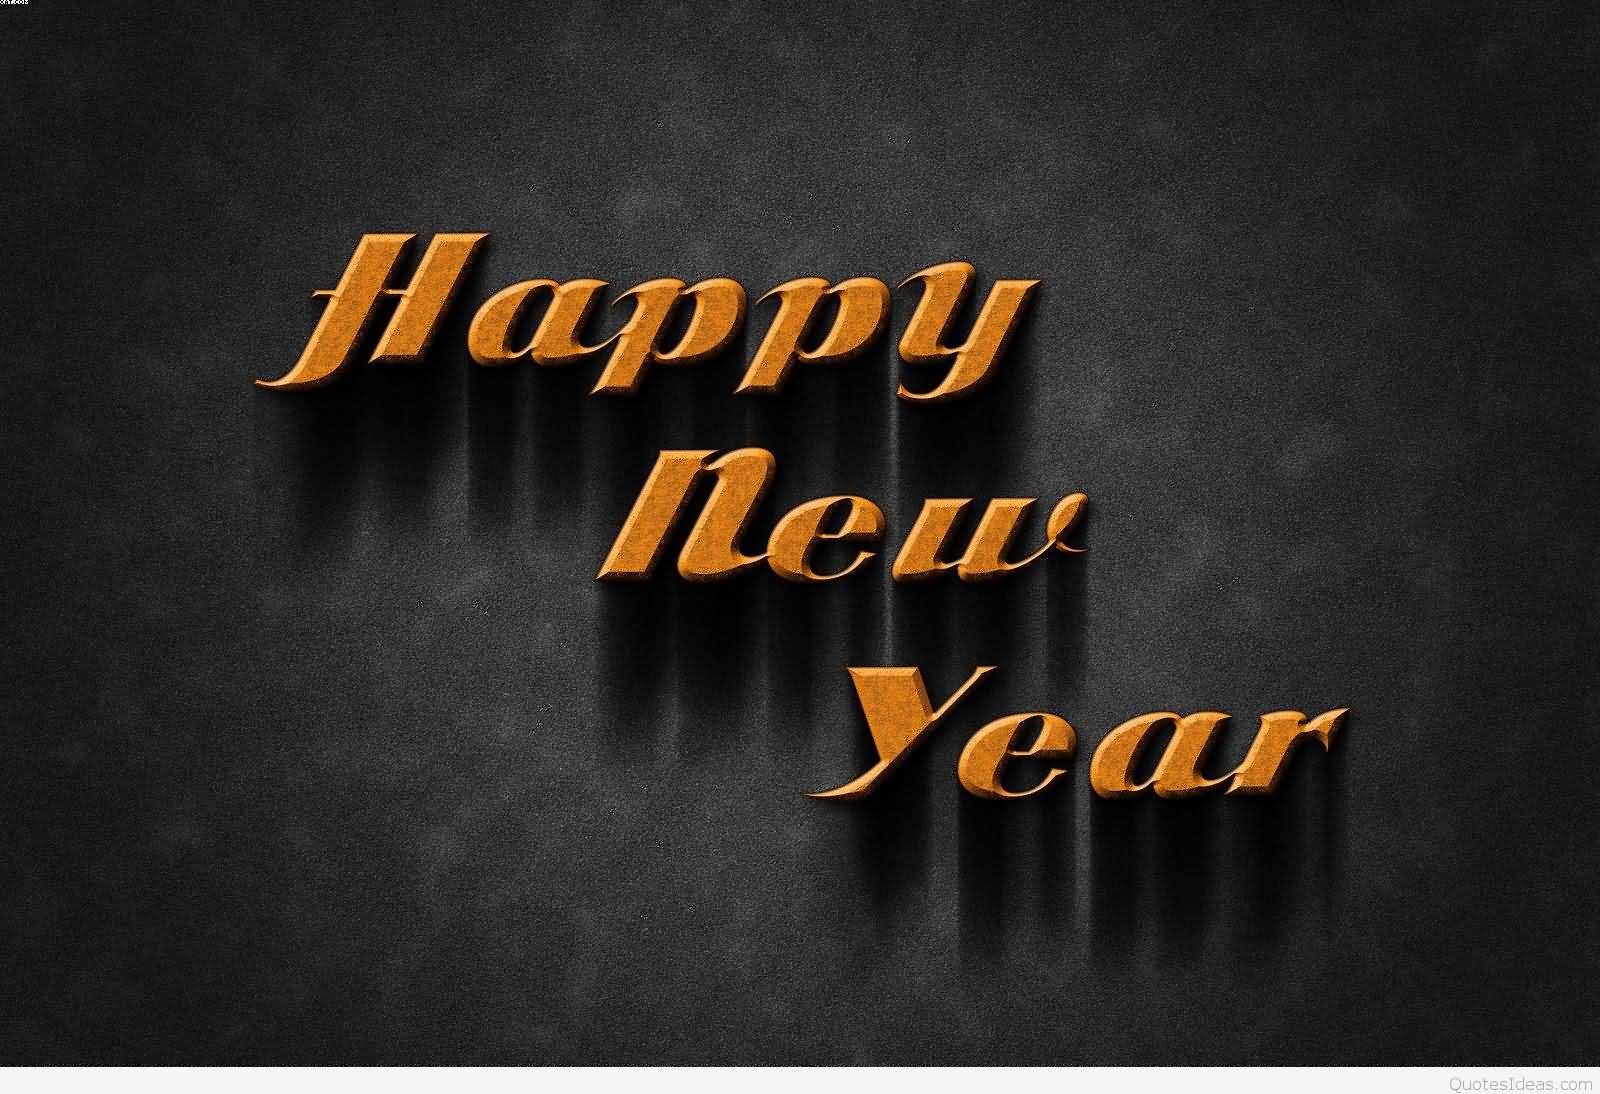 Happy New Year text on black background